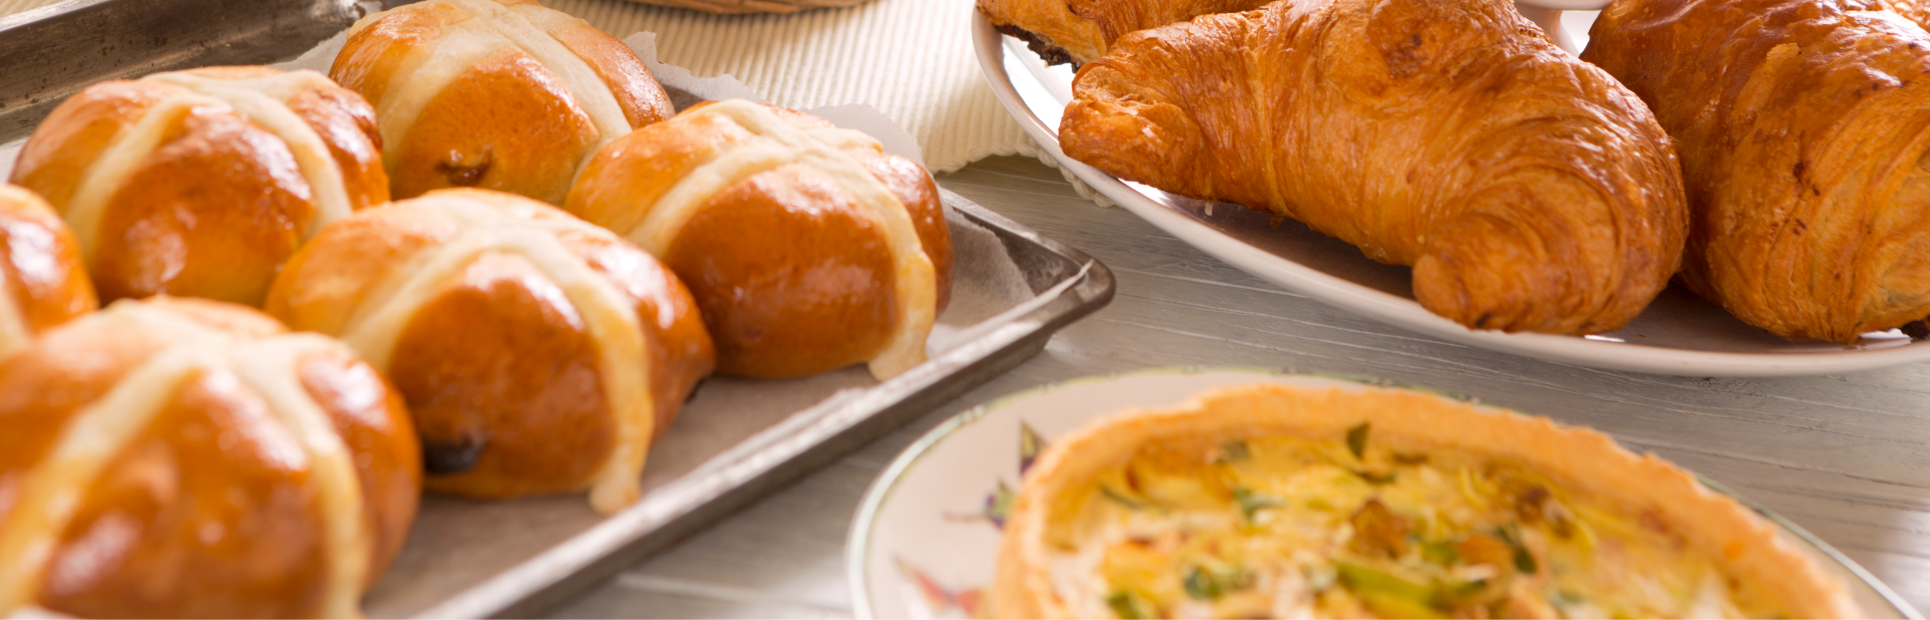 Various baked goods: buns, quiche and croissants.